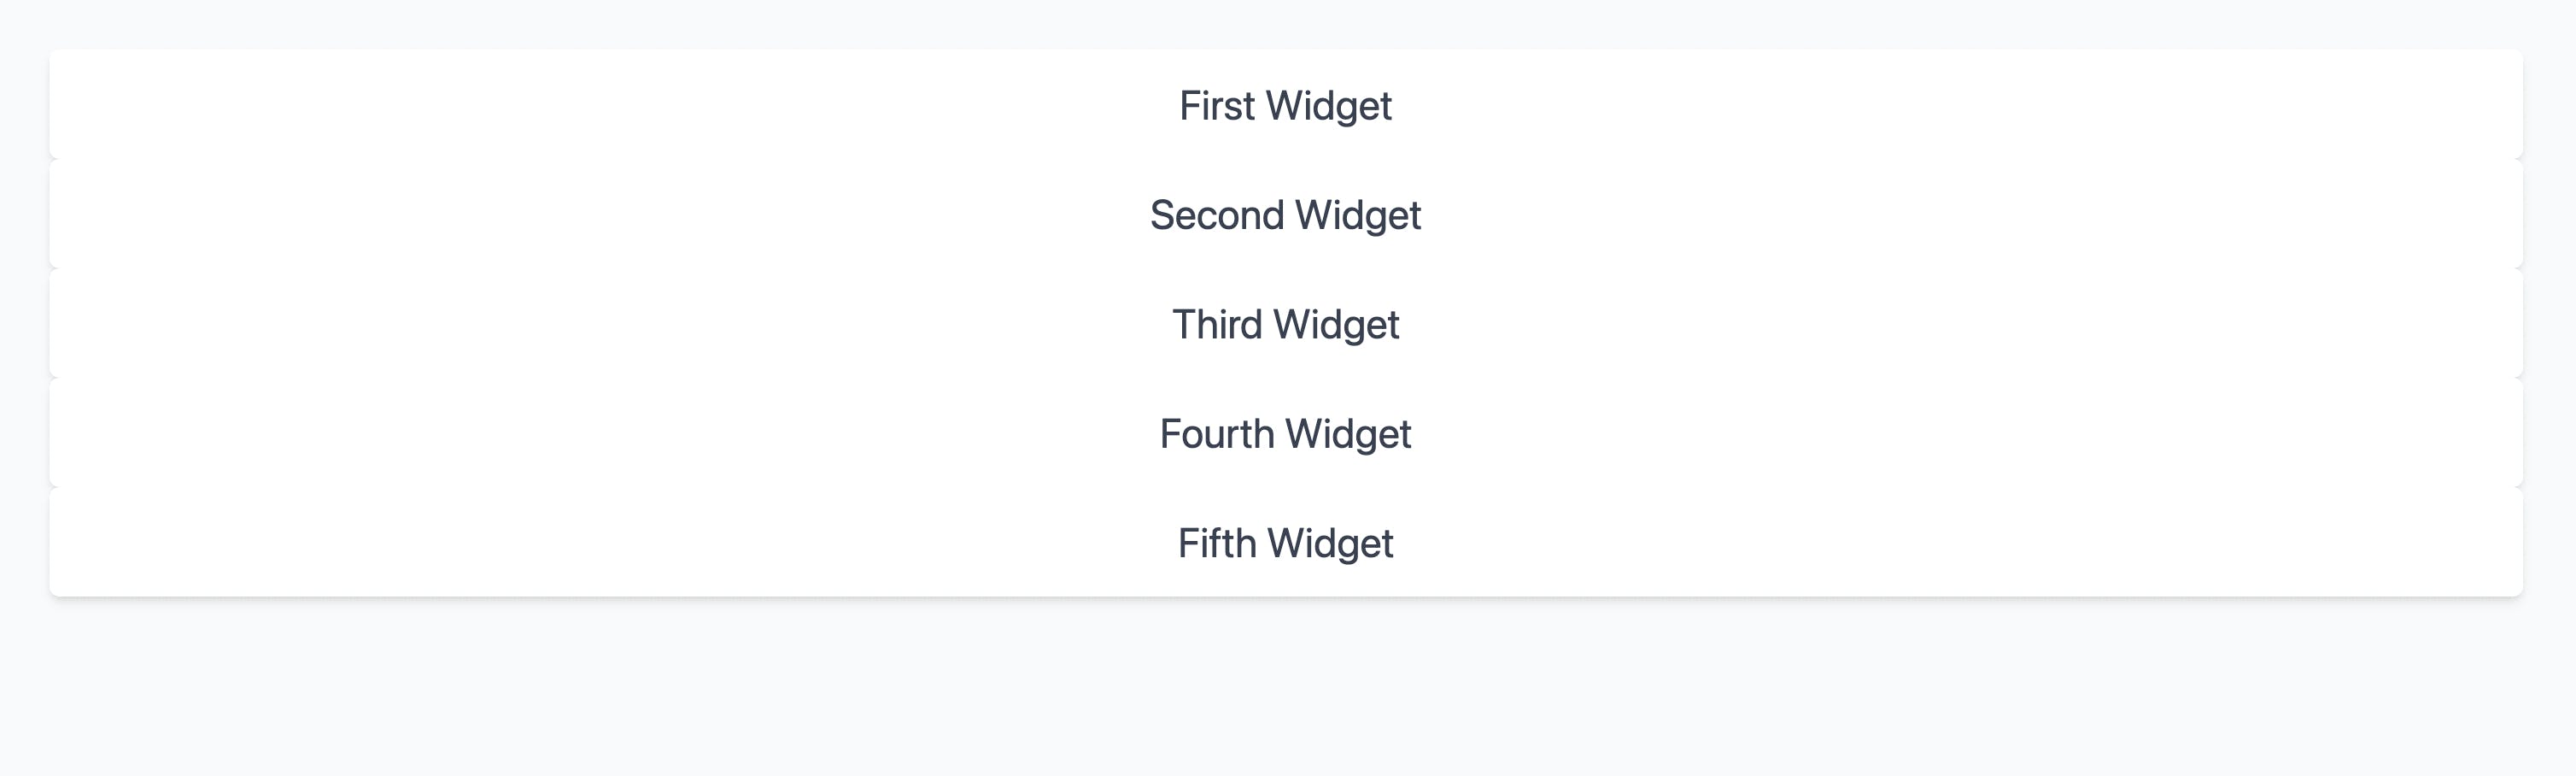 Widgets without the grid